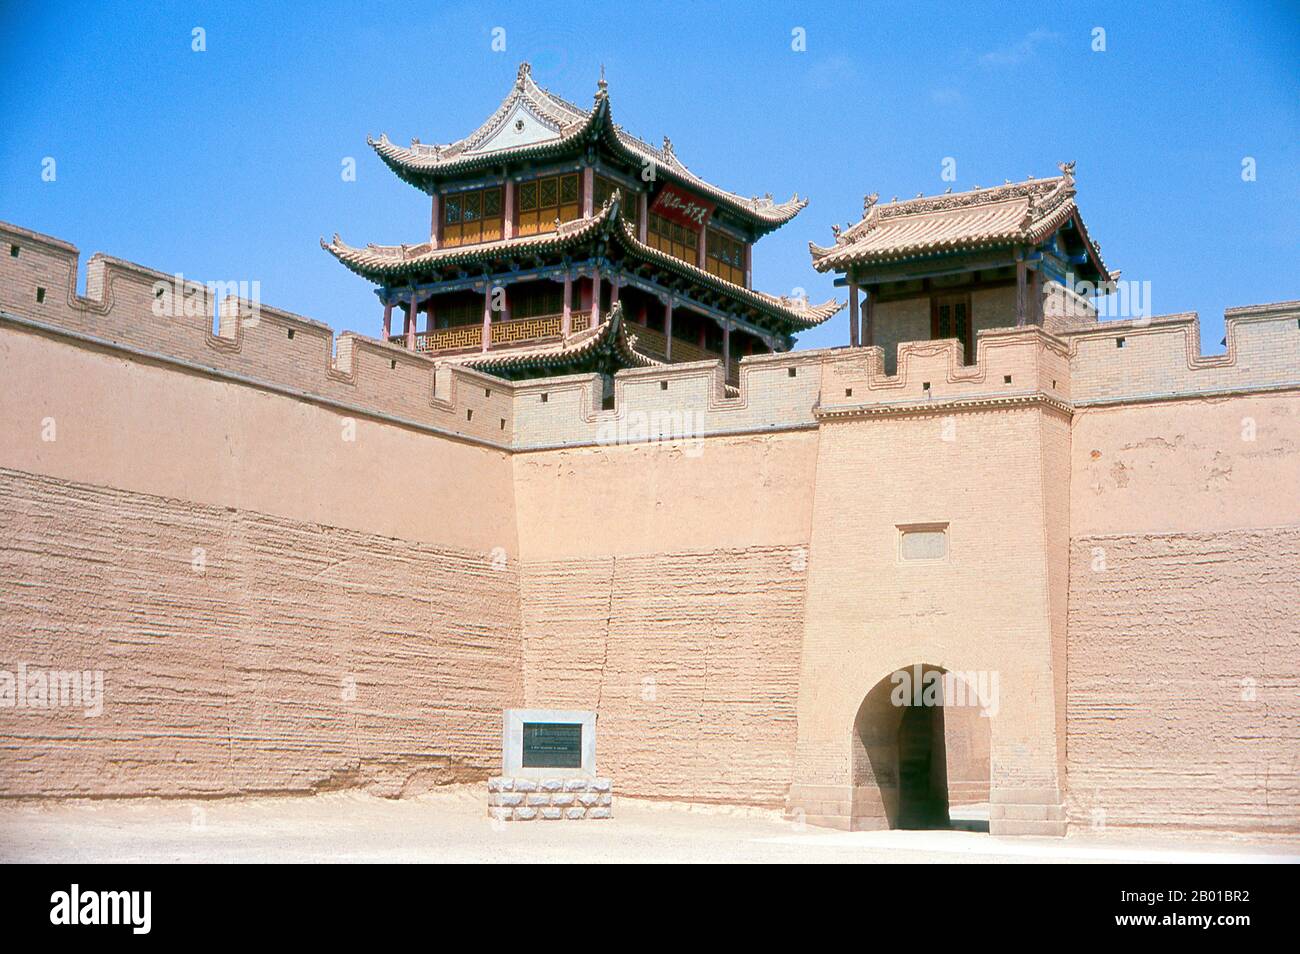 China: Outer entrance to Guanghua Men (Gate of Enlightenment), Jiayuguan Fort, Jiayuguan, Gansu.  Jiayuguan, the ‘First and Greatest Pass under Heaven’, was completed in 1372 on the orders of Zhu Yuanzhang, the first Ming Emperor (1368-98), to mark the end of the Ming Great Wall. It was also the very limits of Chinese civilisation, and the beginnings of the outer ‘barbarian’ lands.  For centuries the fort was not just of strategic importance to Han Chinese, but of cultural significance as well. This was the last civilised place before the outer darkness. Stock Photo